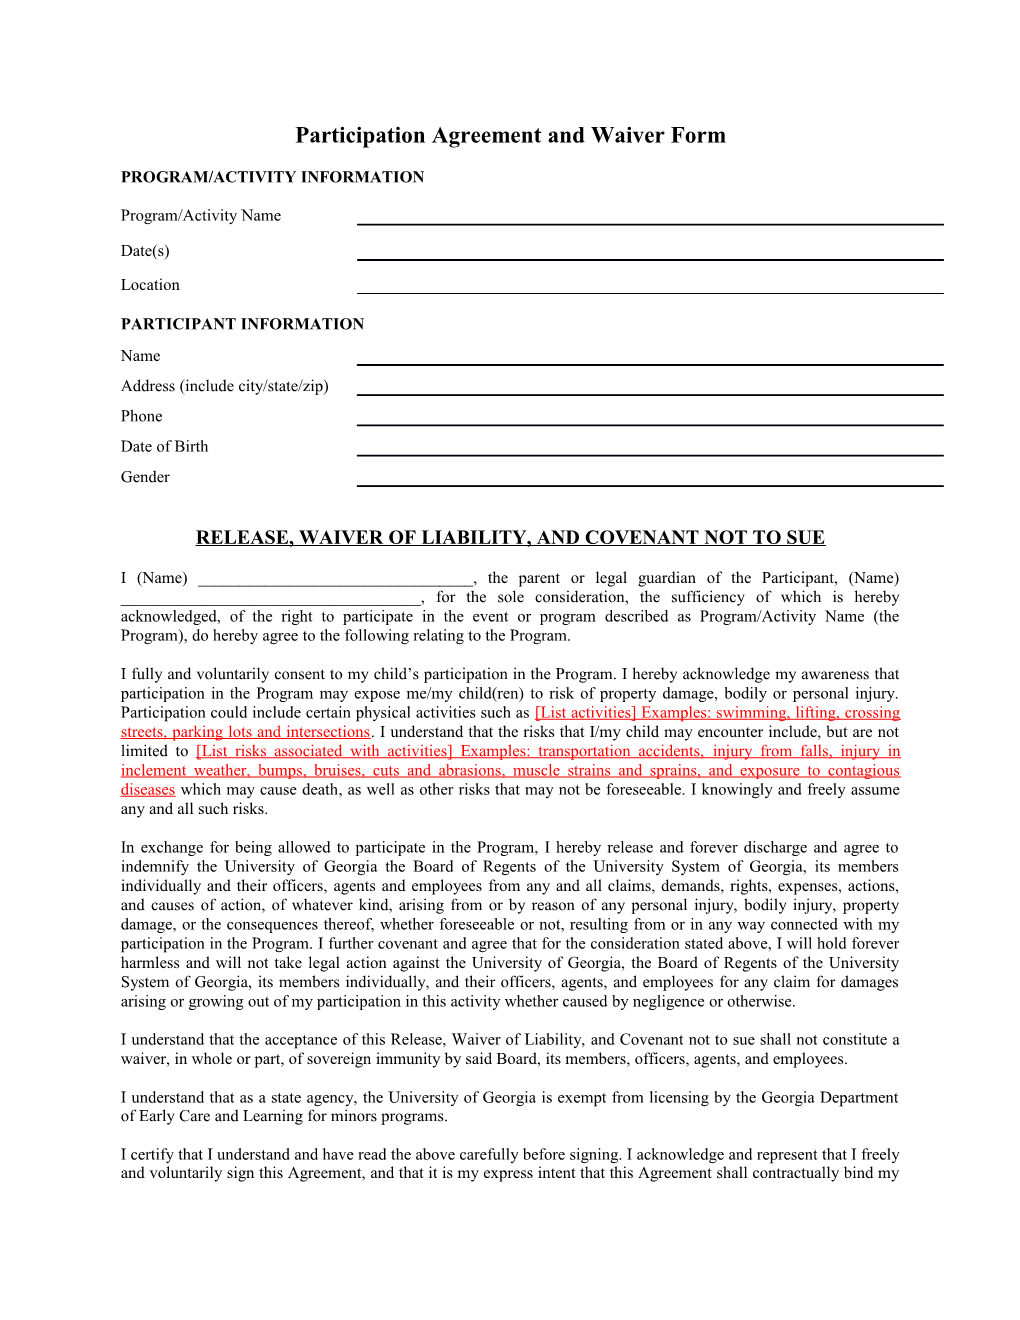 Participation Agreement and Waiver Form